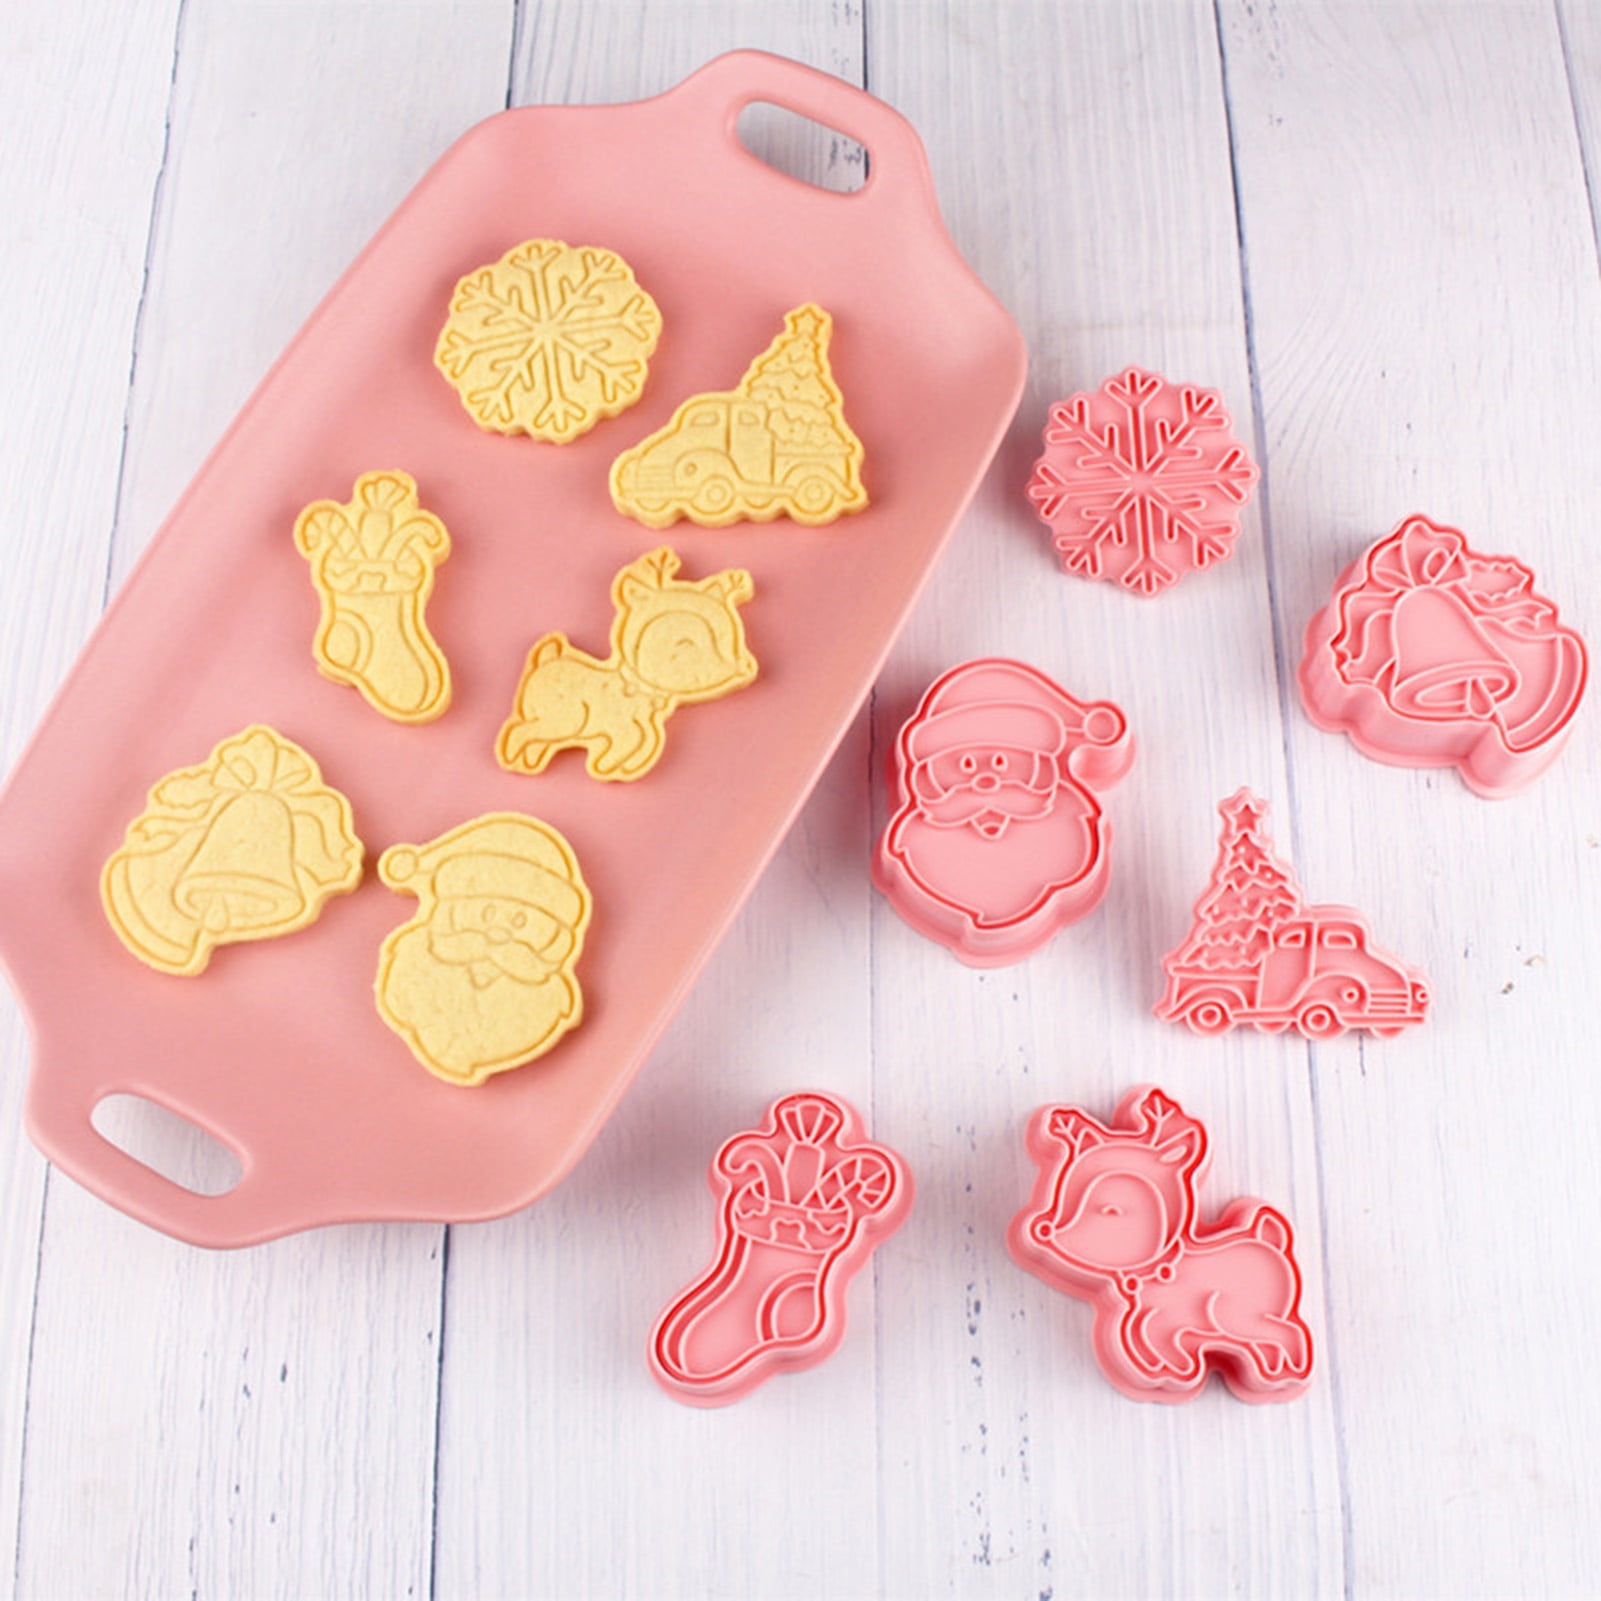 6pcs/Set Christmas Cookie Cutter Mold Stamp Pattern Biscuit Fondant Baking Mould 